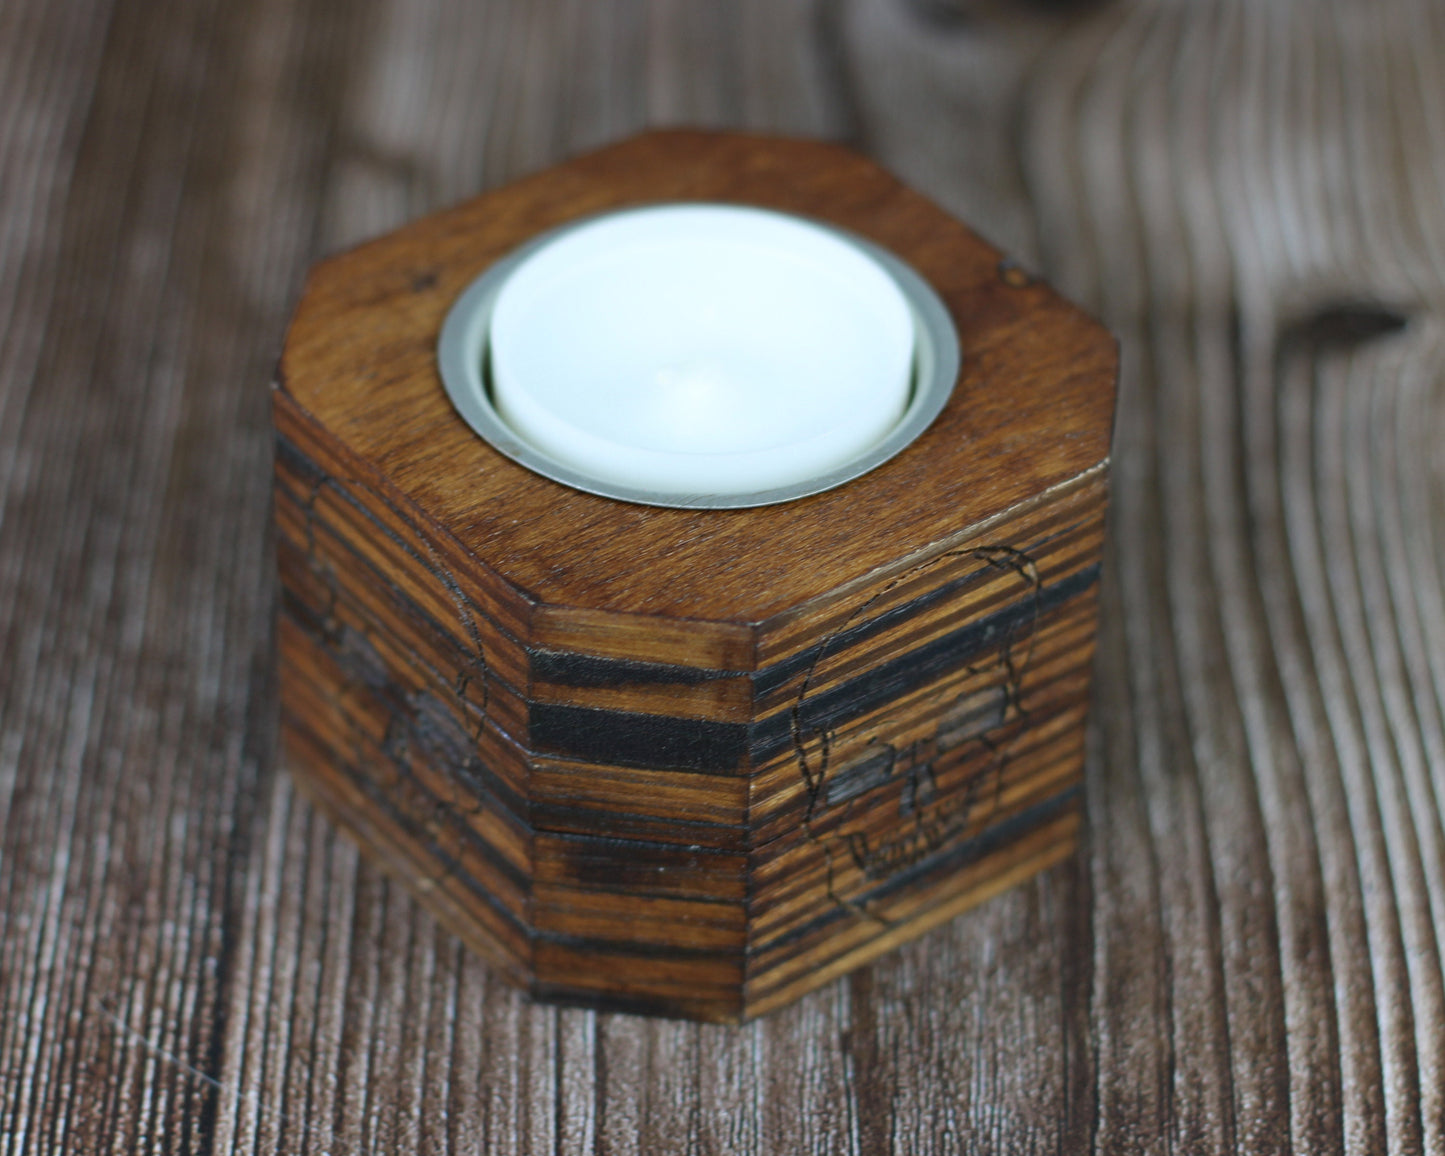 Secret compartment wooden candle holder with engraved skull, stash your valuables safely in the hidden tin